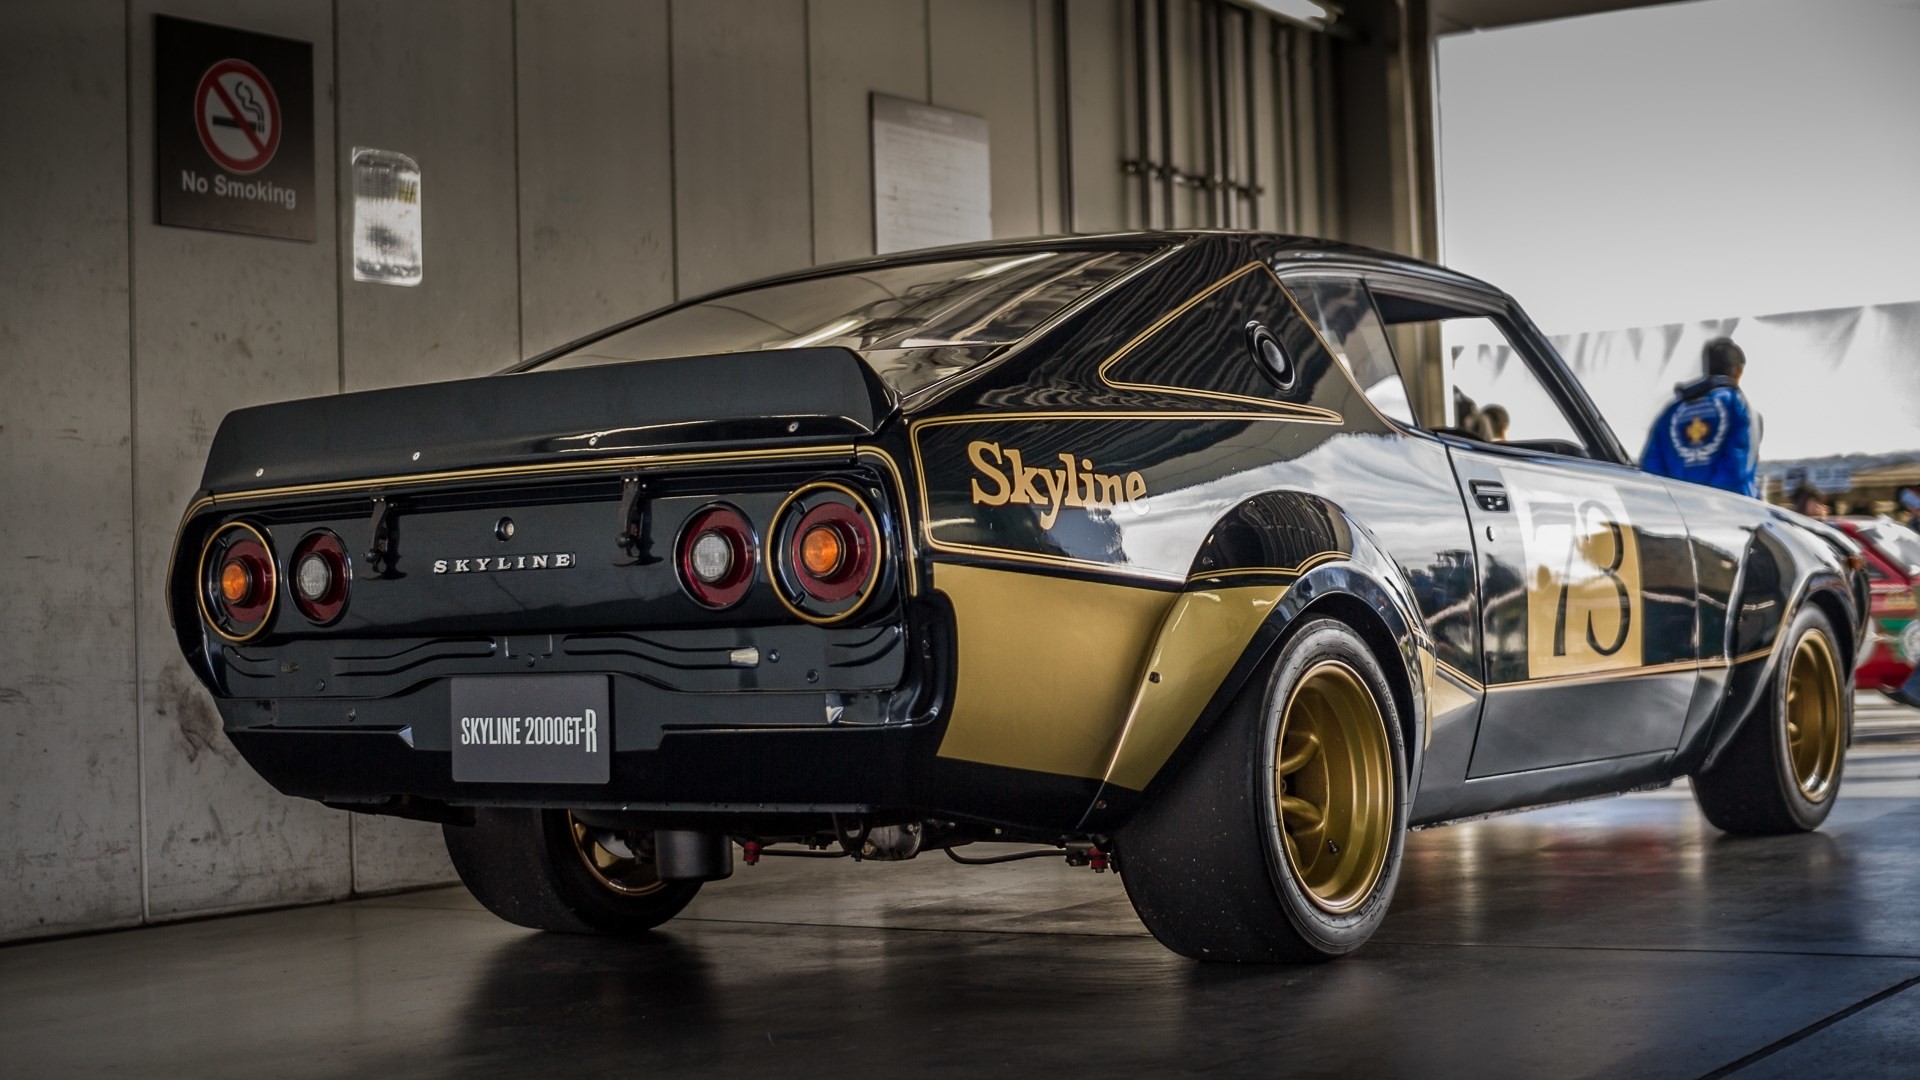 1920x1080 nissan skyline picture - Full HD Wallpapers, Photos - nissan skyline  category